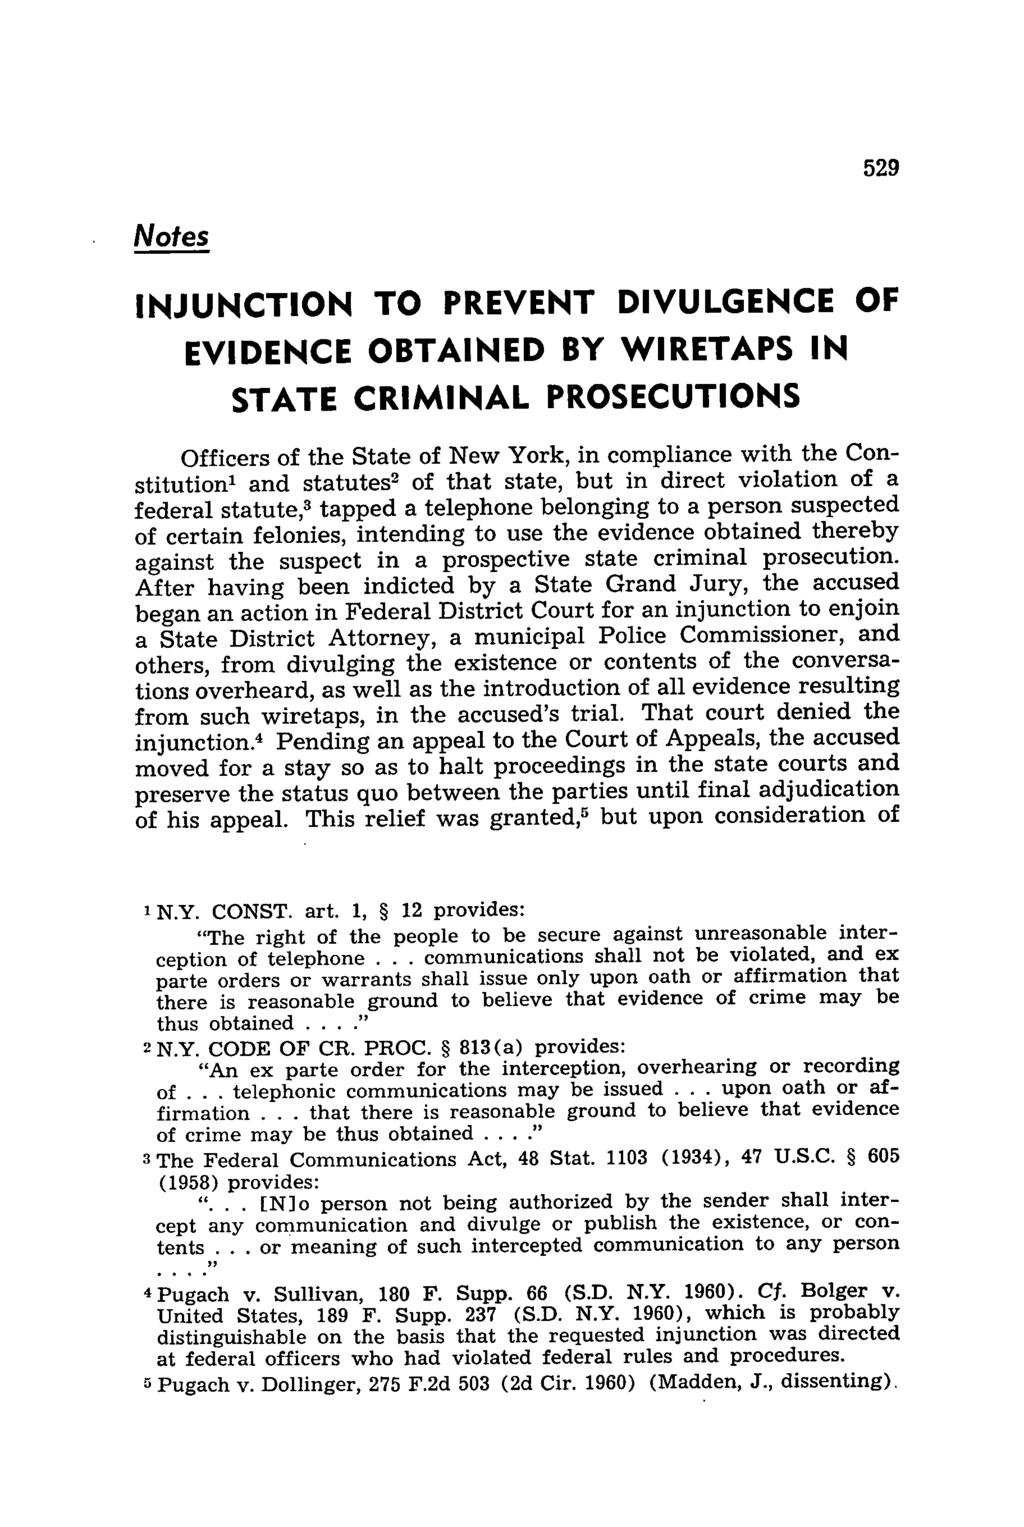 Notes INJUNCTION TO PREVENT DIVULGENCE EVIDENCE OBTAINED BY WIRETAPS IN STATE CRIMINAL PROSECUTIONS OF Officers of the State of New York, in compliance with the Constitution' and statutes 2 of that